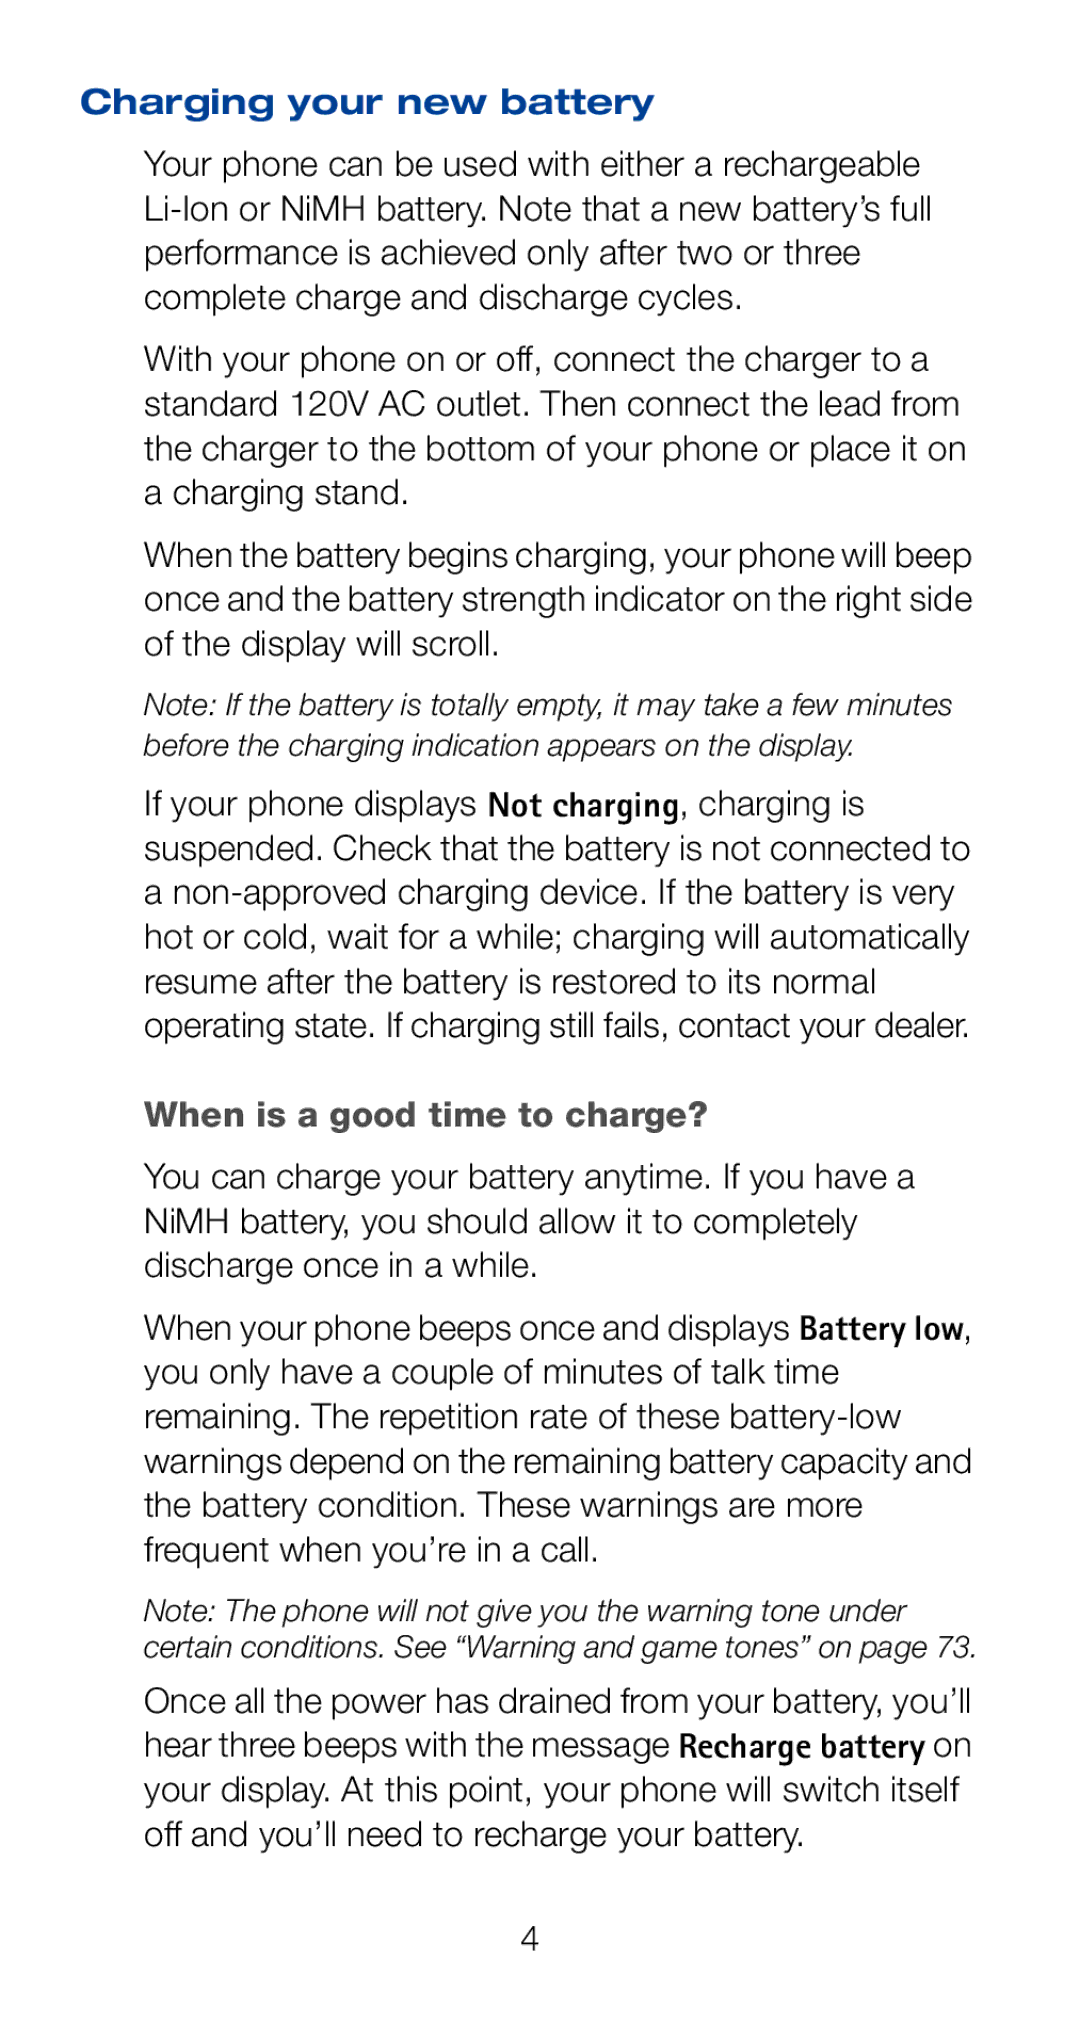 Nokia 6161i owner manual Charging your new battery, When is a good time to charge? 